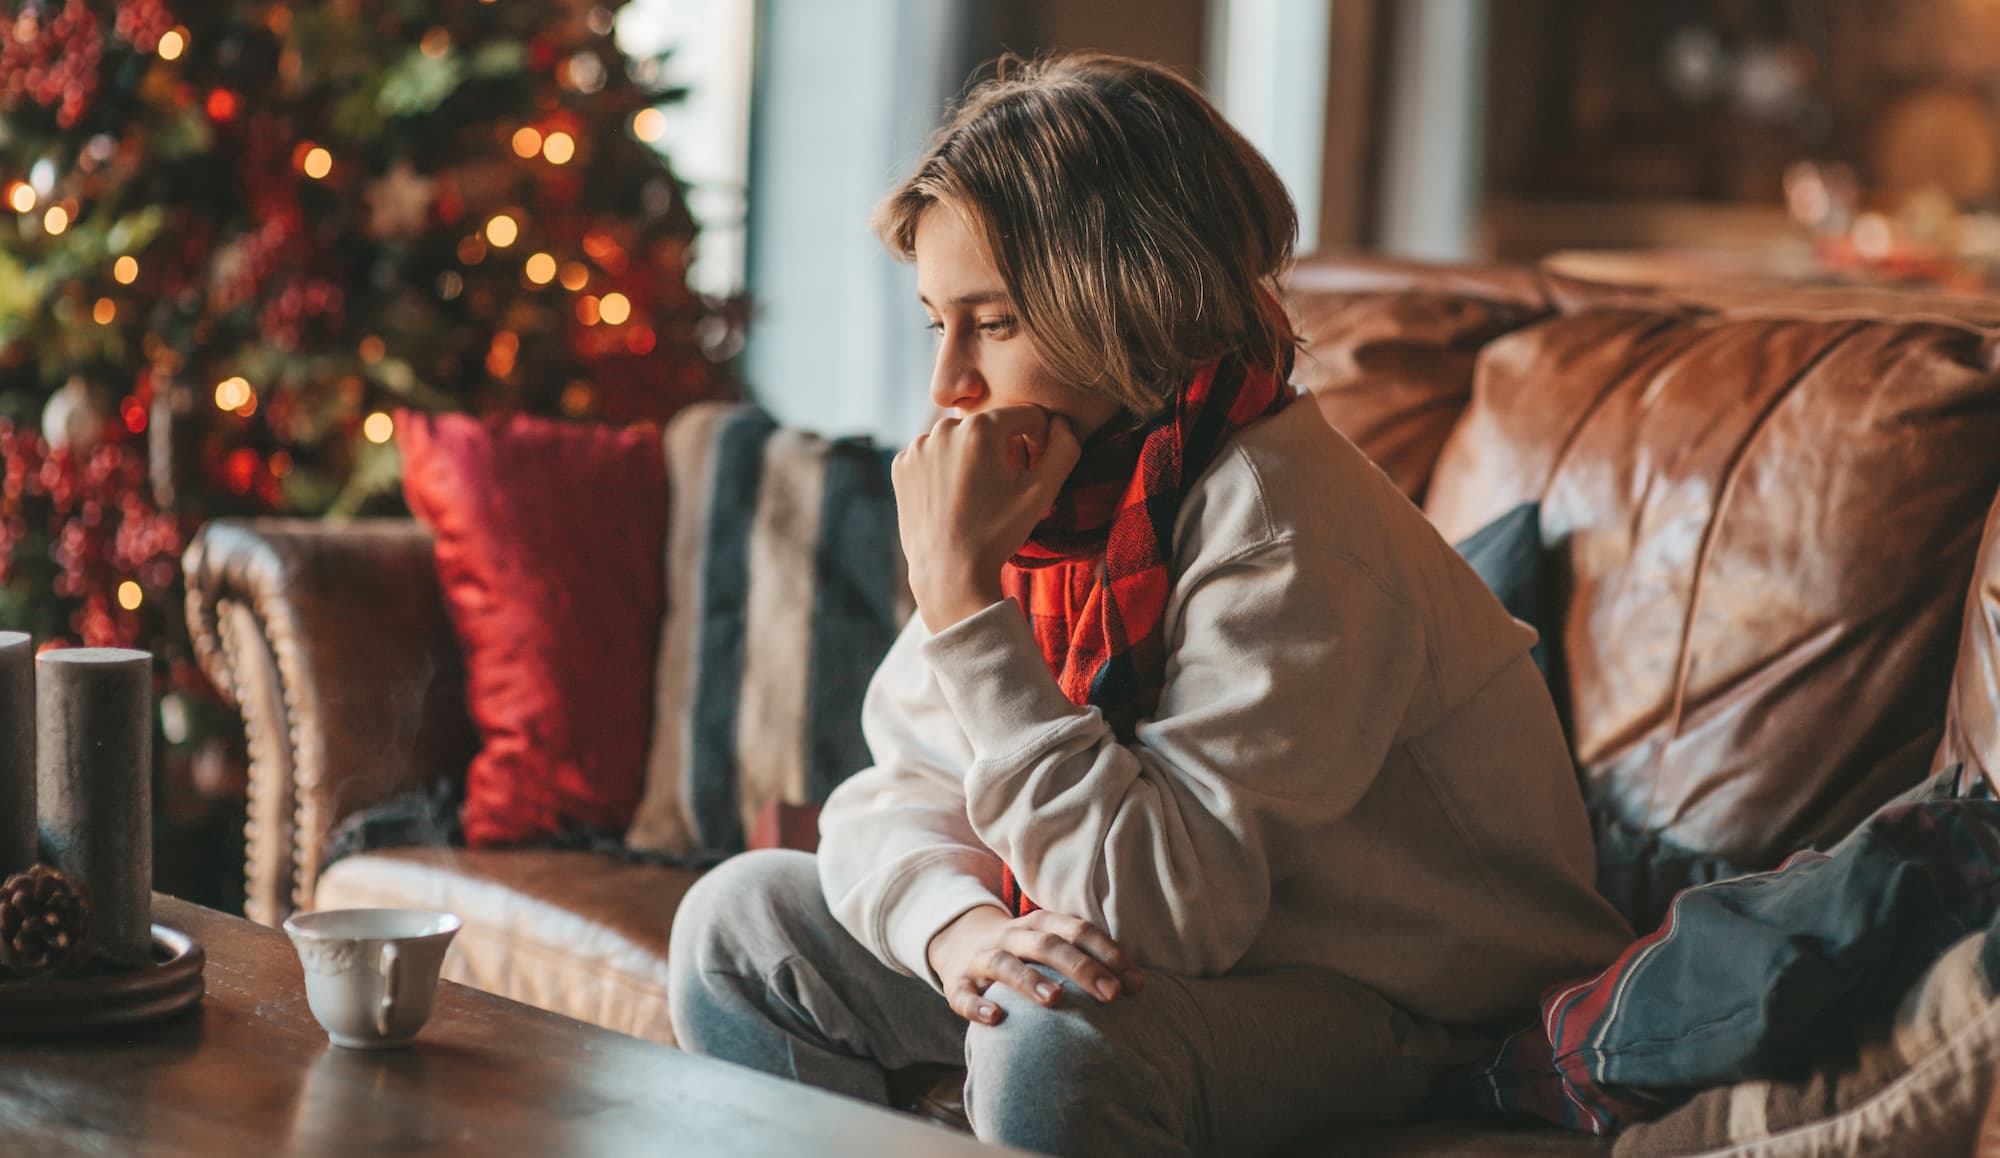 Four Ways to Handle Holiday Stress